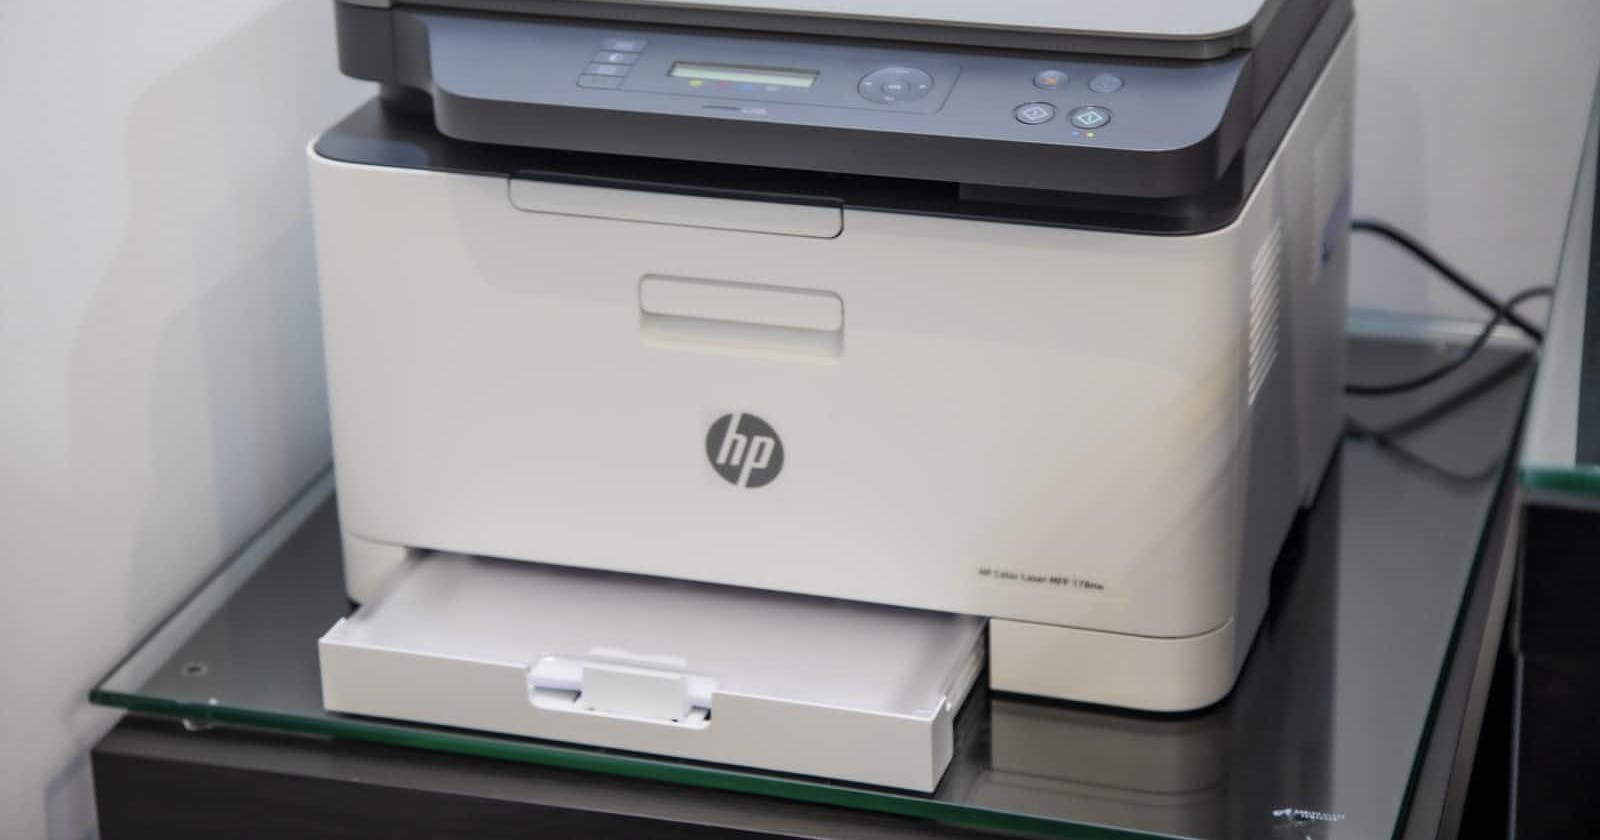 Pwning Printers with LDAP Pass-Back Attack